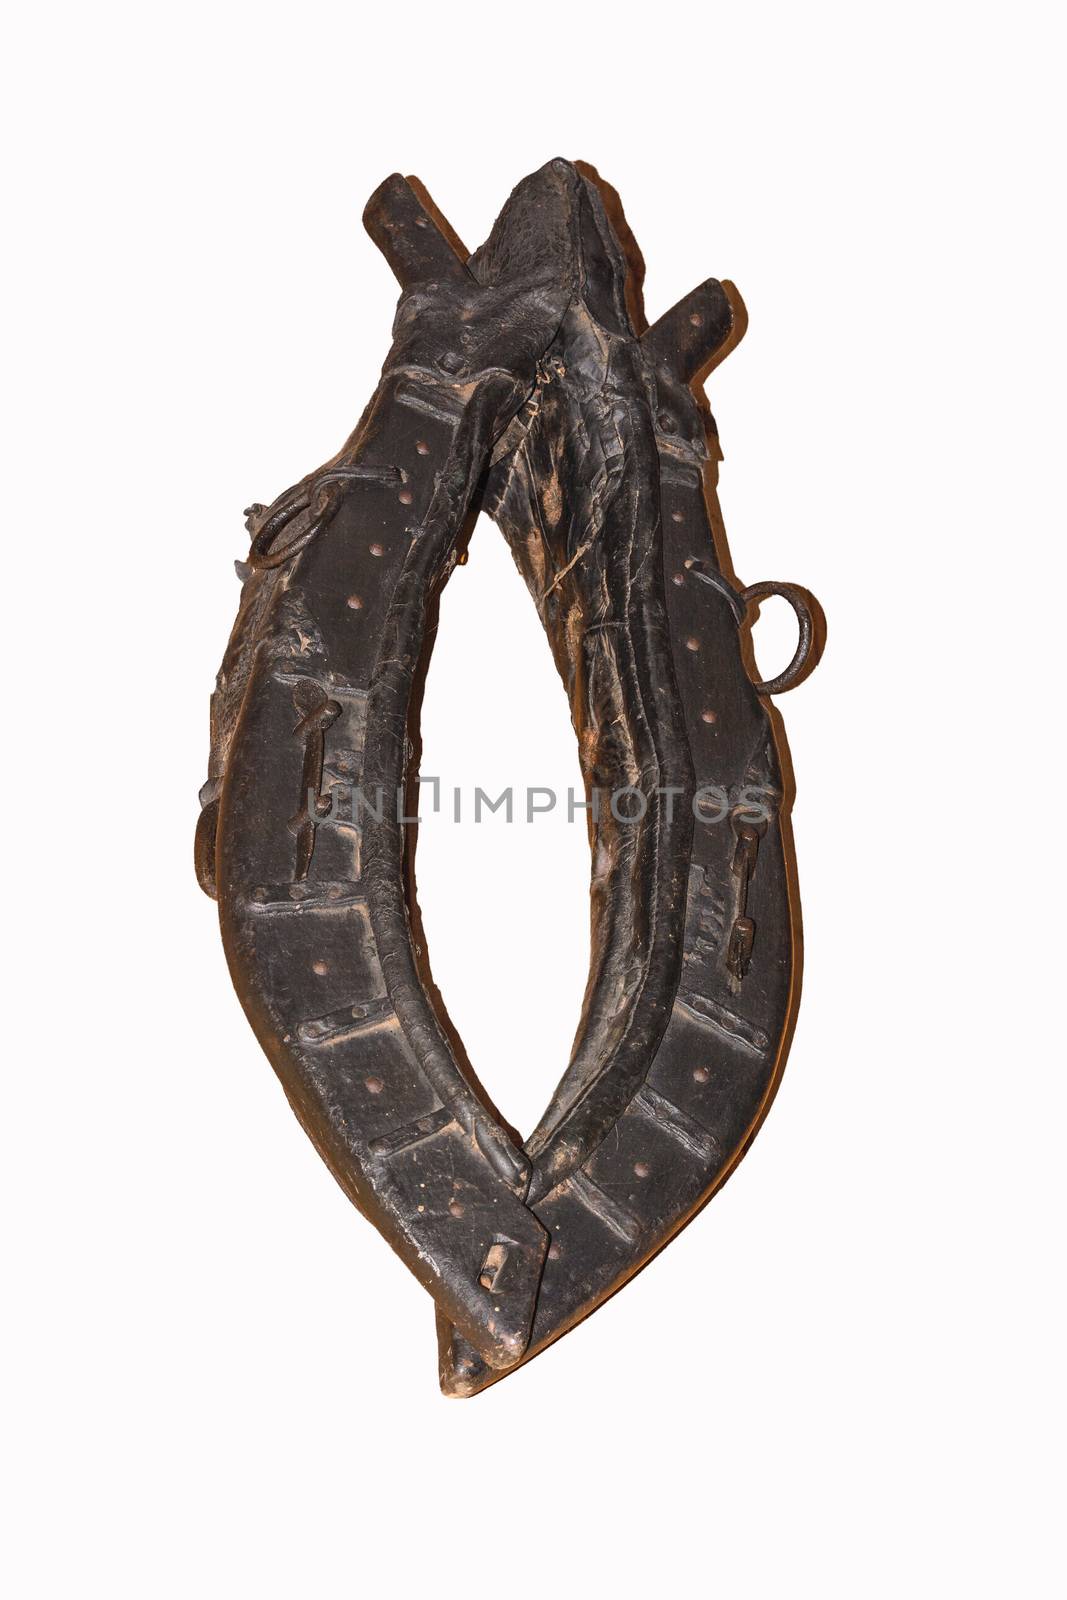 Horse tack on a wooden wall. by JFsPic